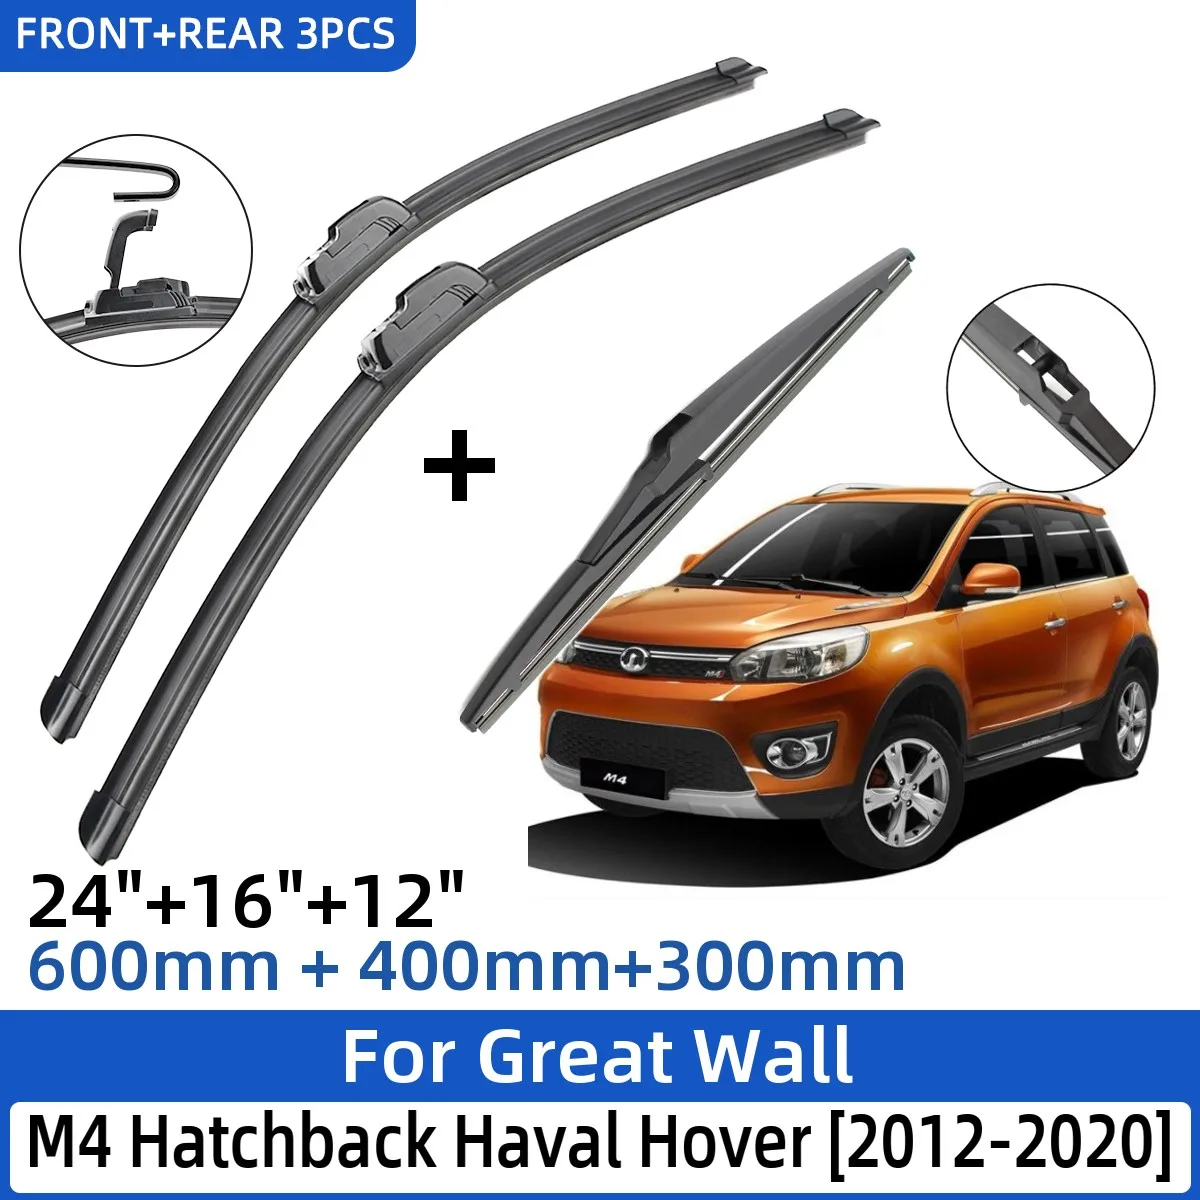 

3PCS For Great Wall M4 Hatchback Haval Hover 2012-2020 24"+16"+12" Front Rear Wiper Blades Windshield Windscreen Window Cutter